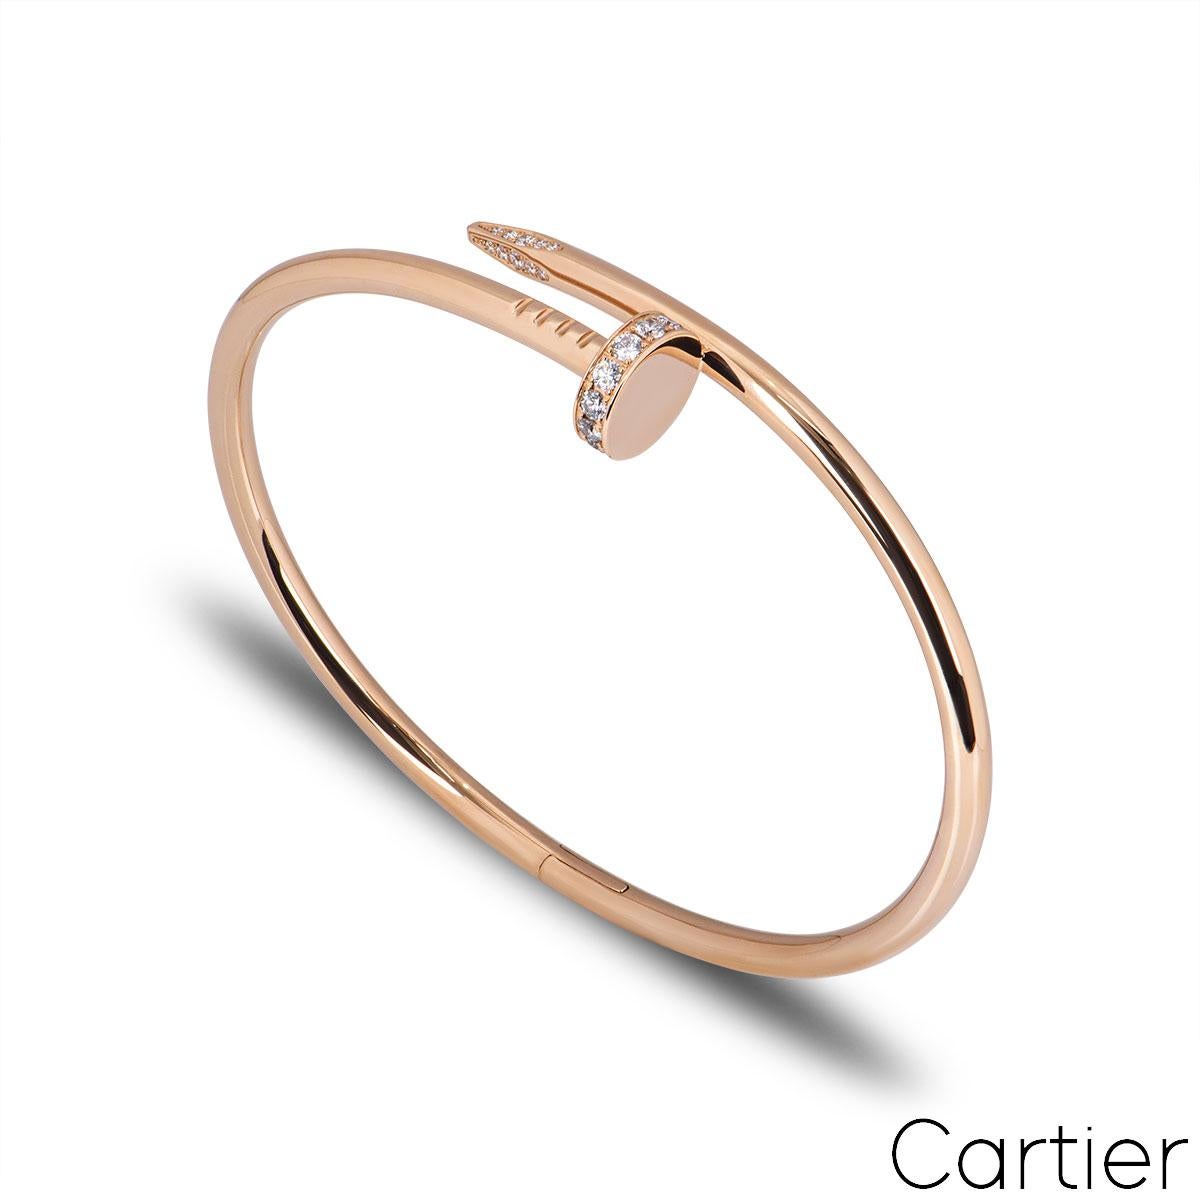 An iconic 18k rose gold Cartier diamond bracelet from the Juste Un Clou collection. The bracelet is in the style of a nail and has 32 round brilliant cut pave diamonds set in the head and tip, totalling 0.59ct. The diamonds are predominantly F